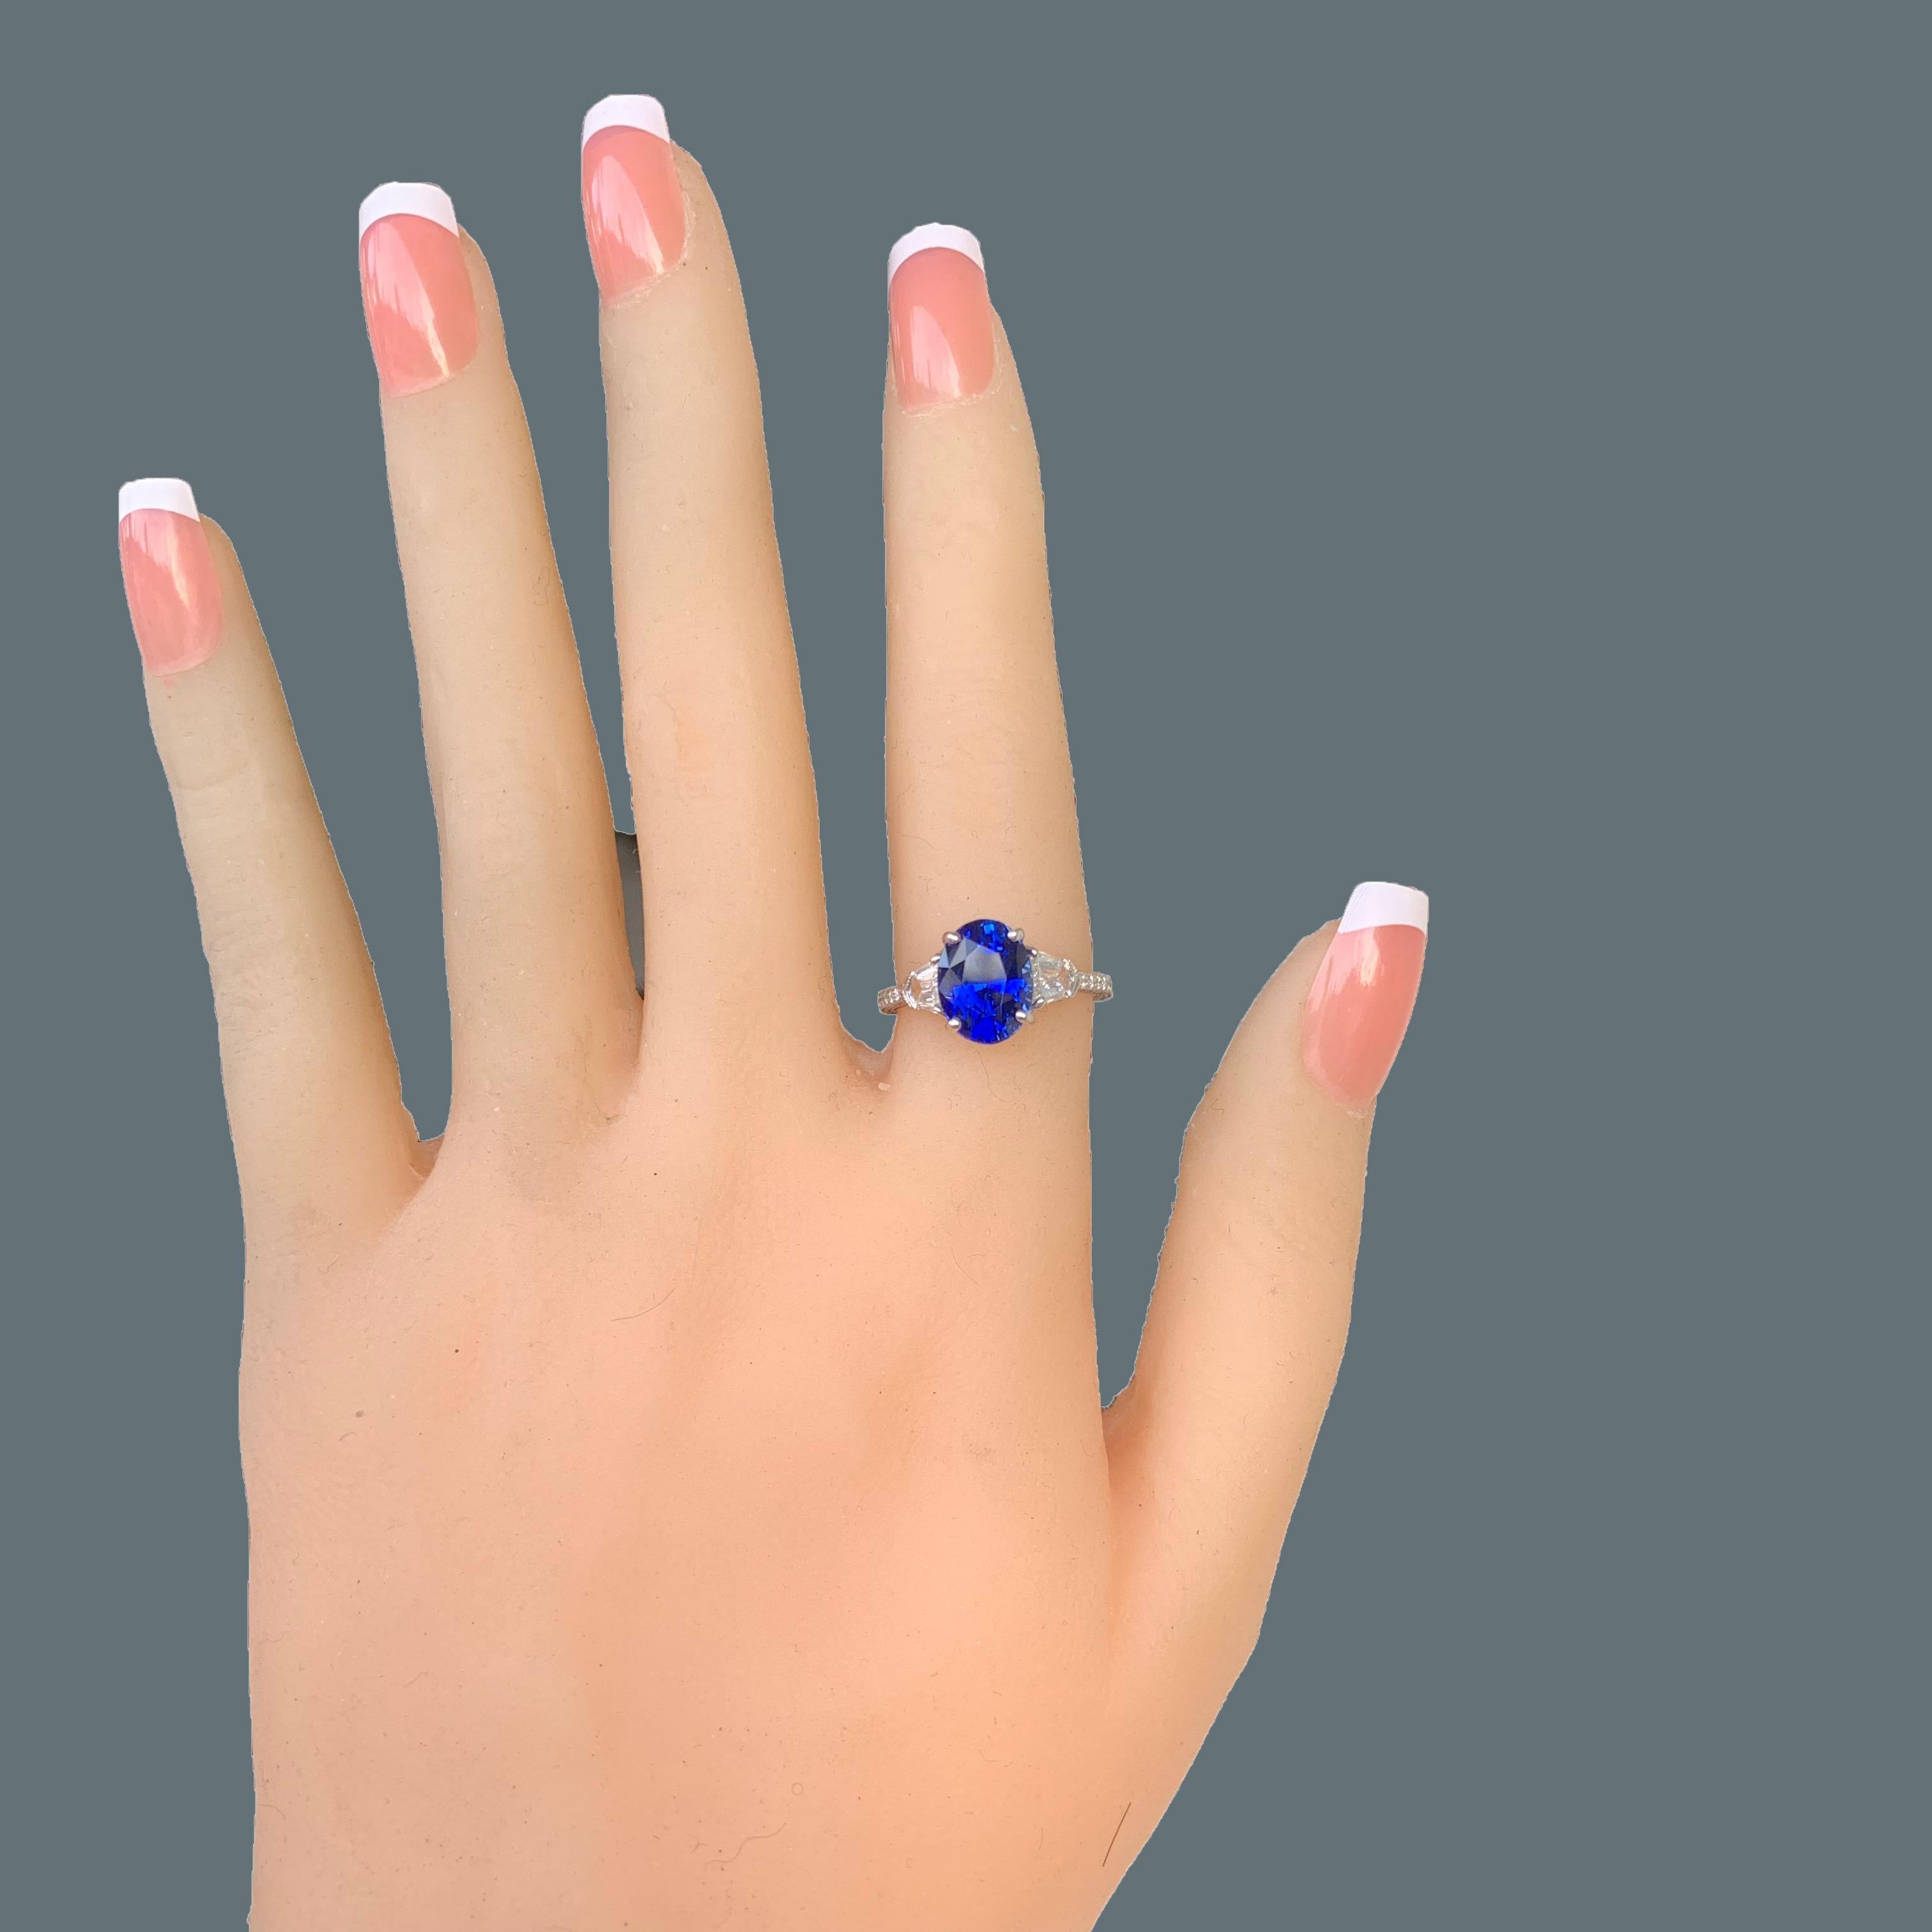 B8094007

1. Carat Weight: 3.68 Carat Sapphire

2. Color: Blue

3. Tone:  Medium - Nice, 7.5 Out of 10

4. Hue: Blue

3. Clarity:  Excellent clarity, no inclusions to the eye. VS if diamond rating.

4. Cut: This stone has a excellent cut,

5.